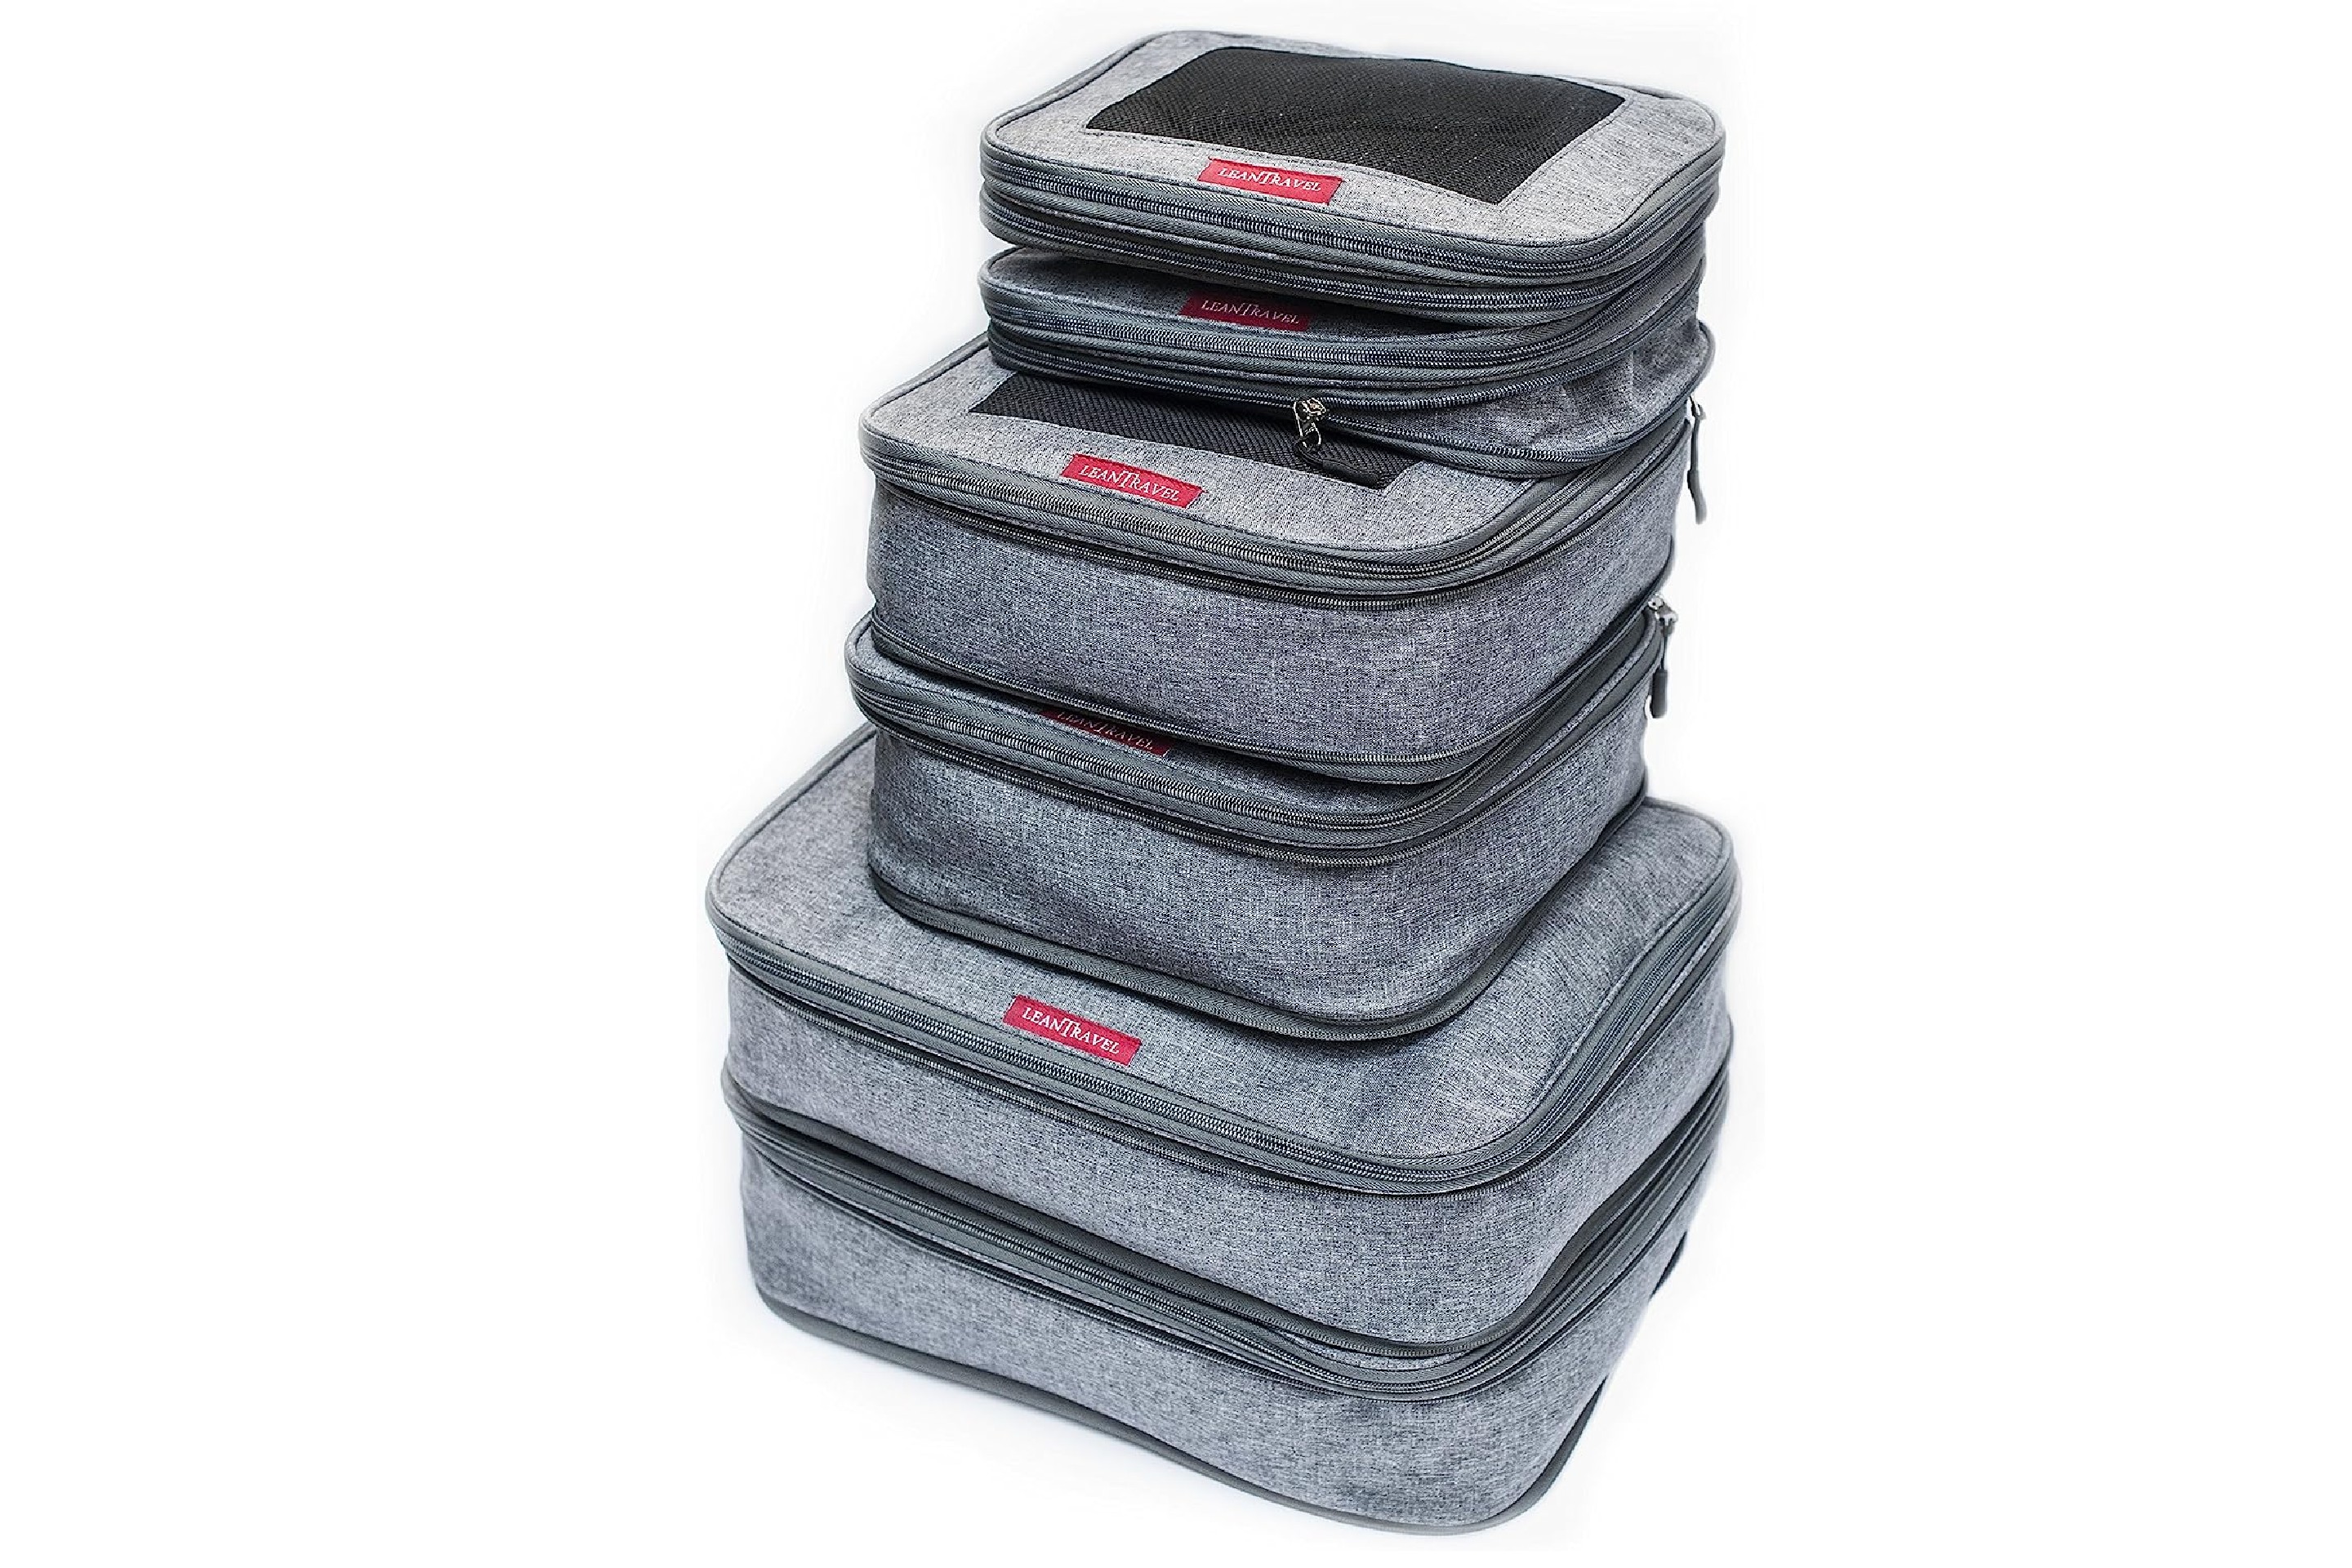 LeanTravel Compression Packing Cubes